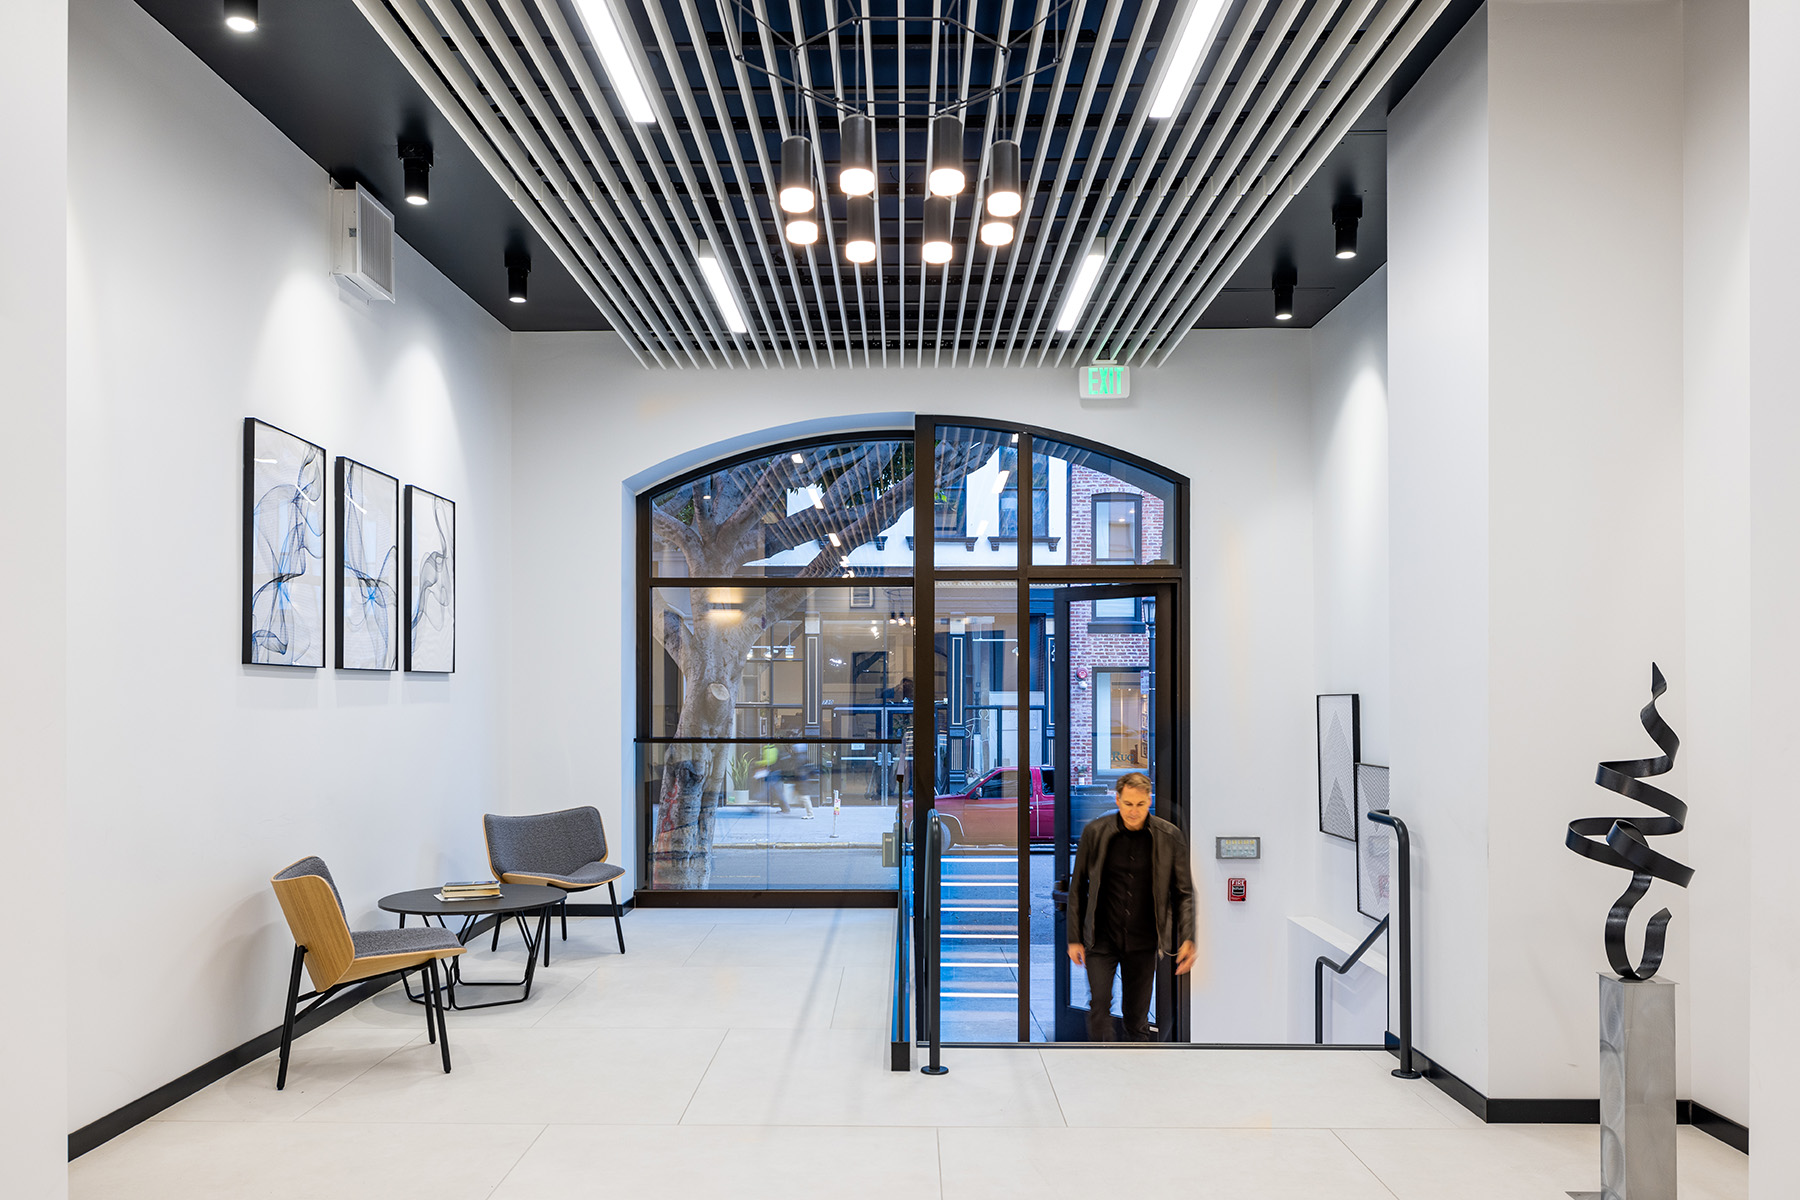 Using linear, pendant and surface mount downlights on the ceiling, designers created layers of light in an office lobby with street-facing windows.